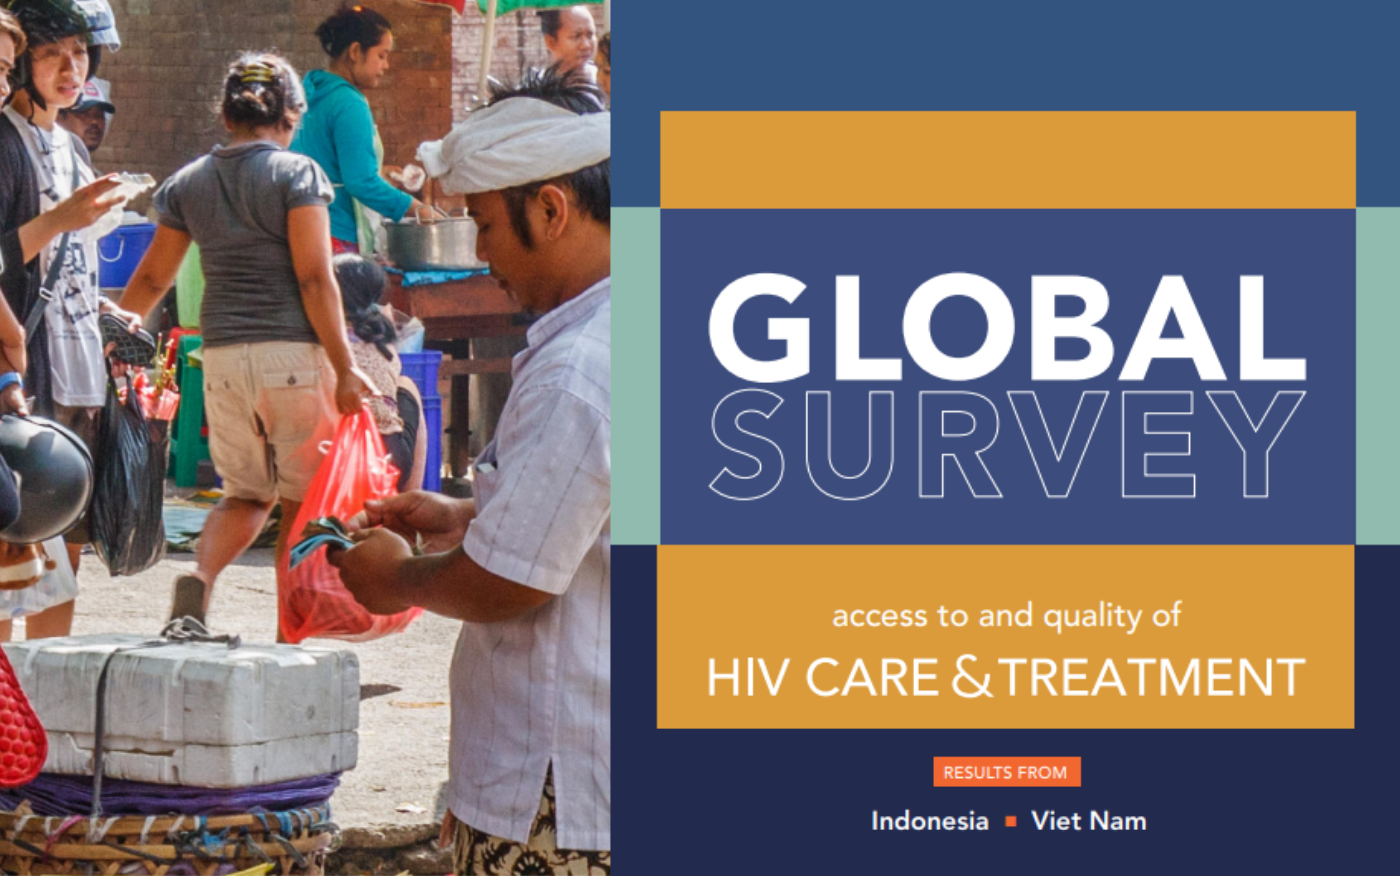 Global survey on access to and quality of HIV treatment and care in Vietnam & Indonesia